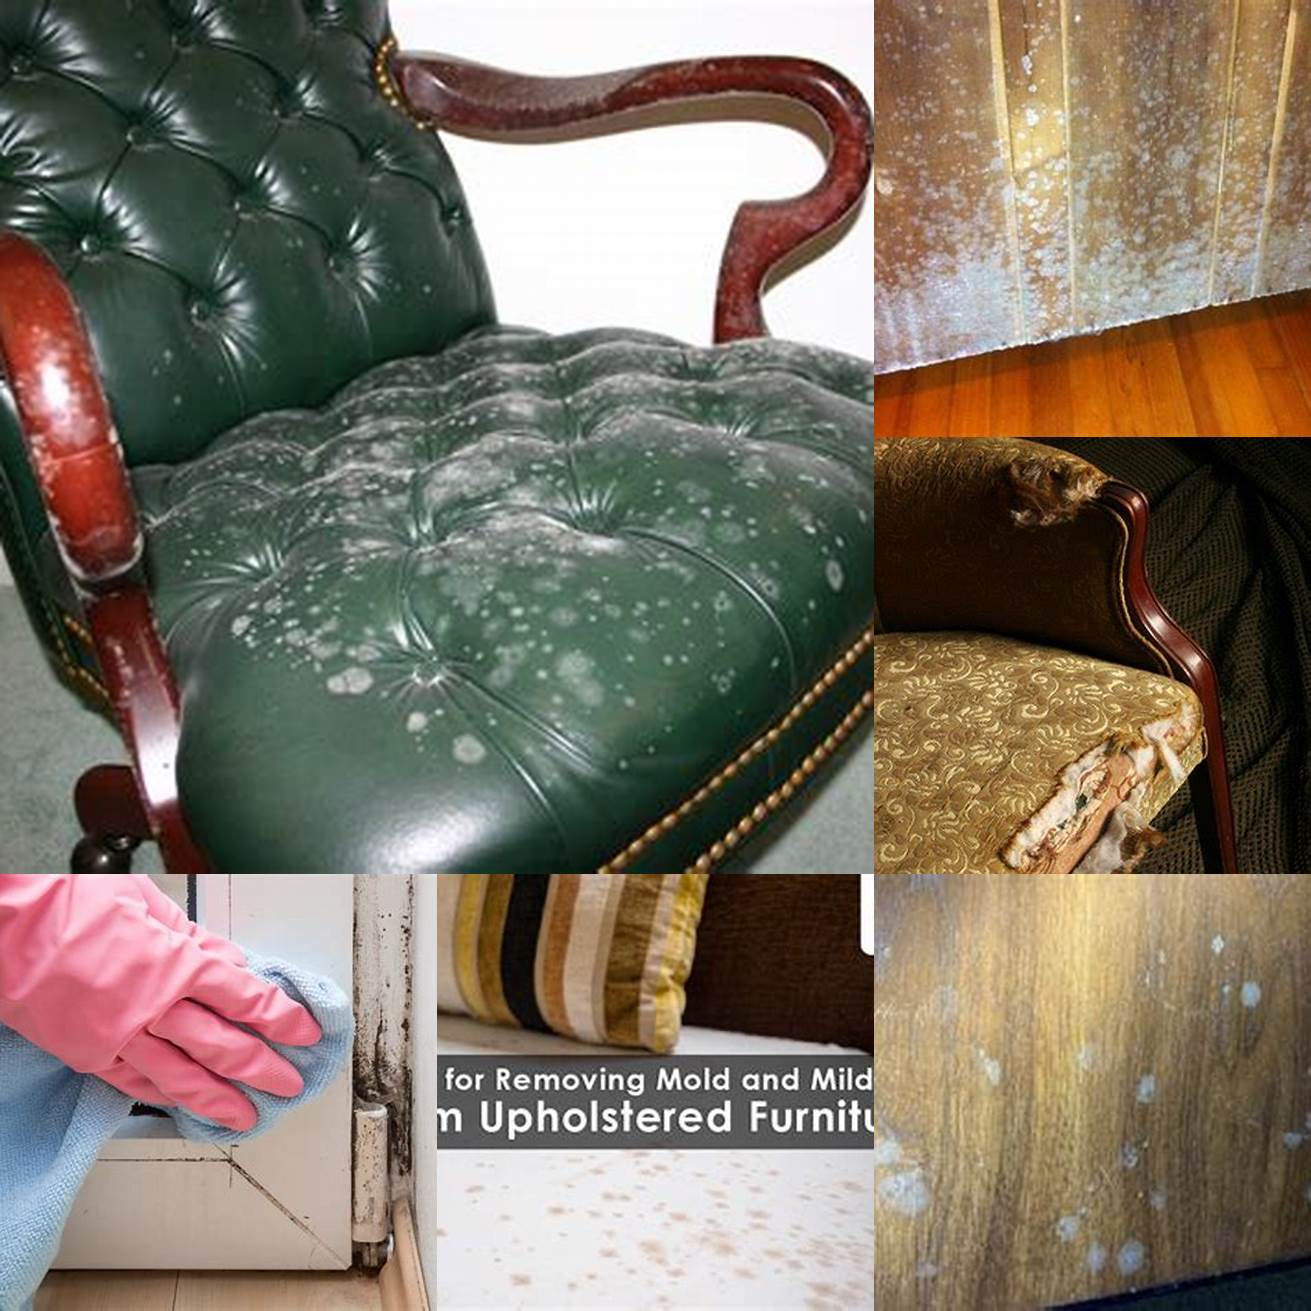 Mold and Mildew -